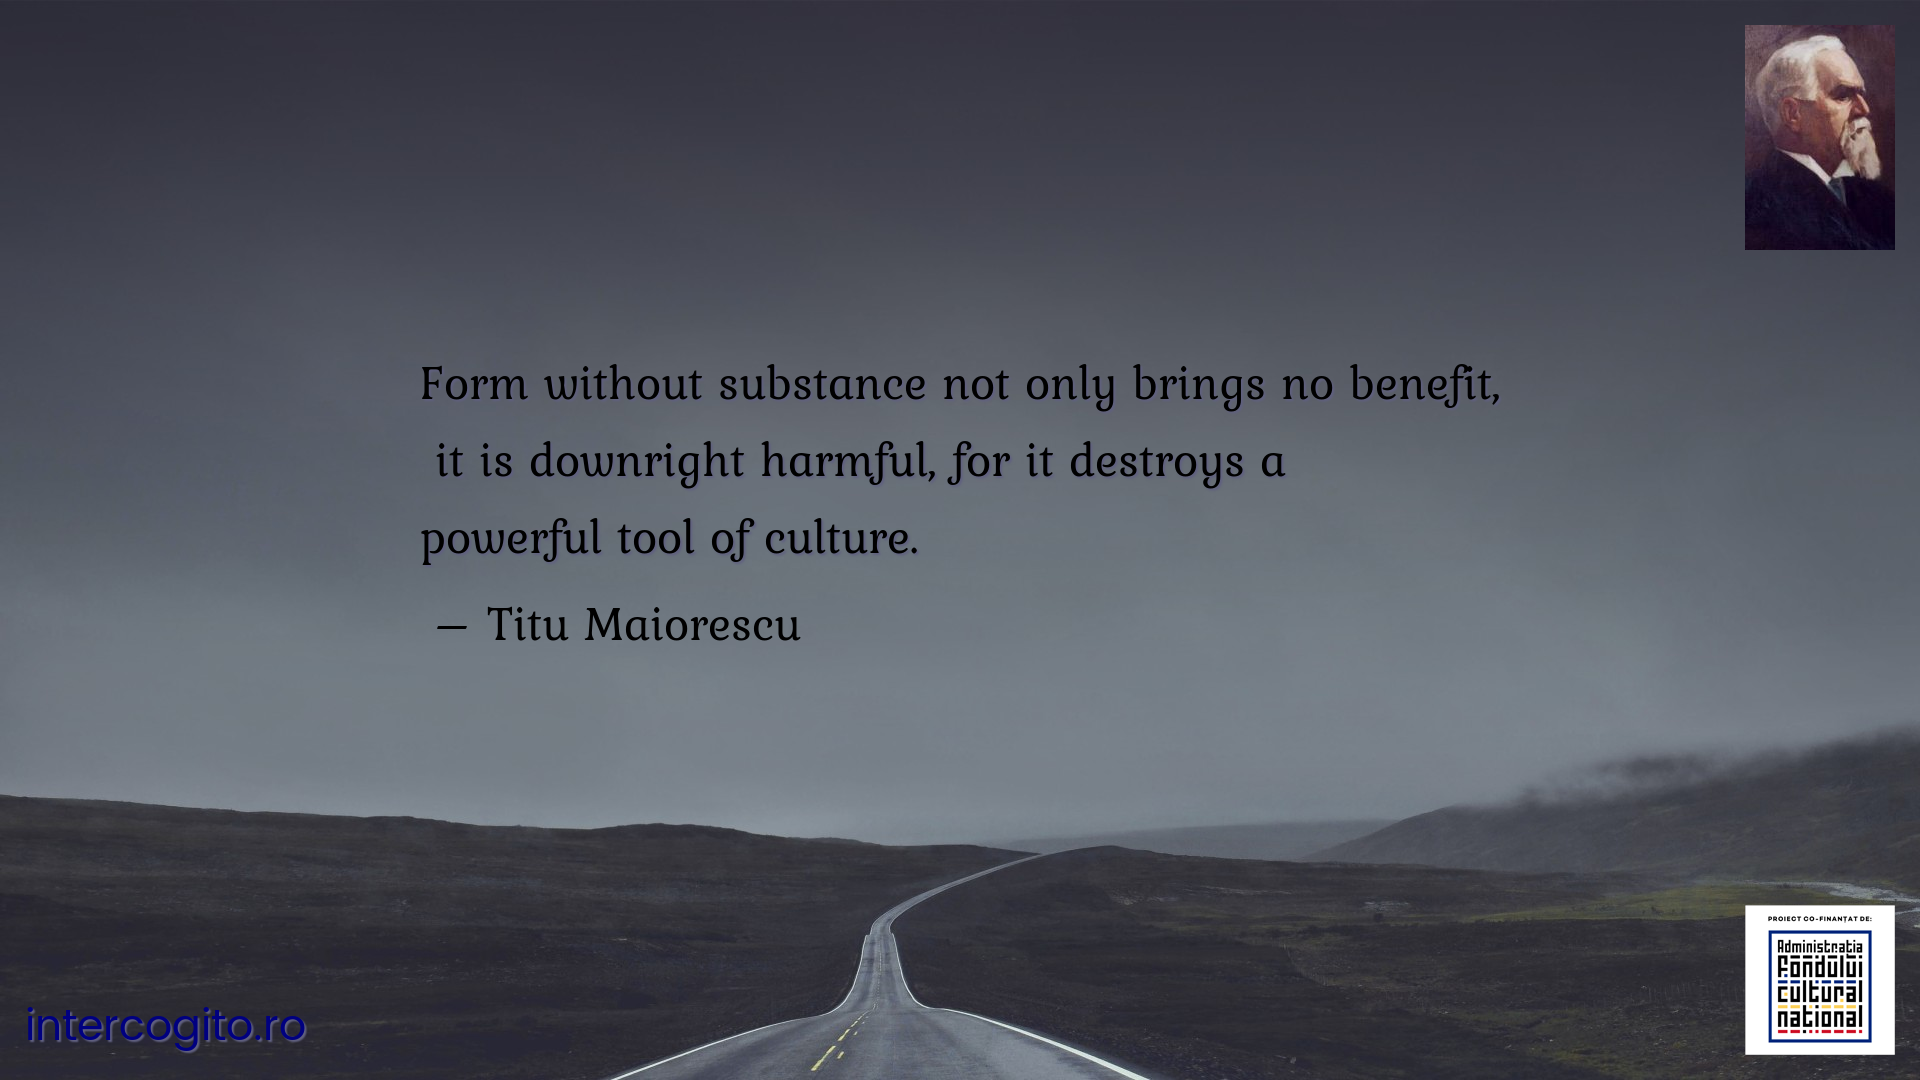 Form without substance not only brings no benefit,  it is downright harmful, for it destroys a powerful tool of culture.